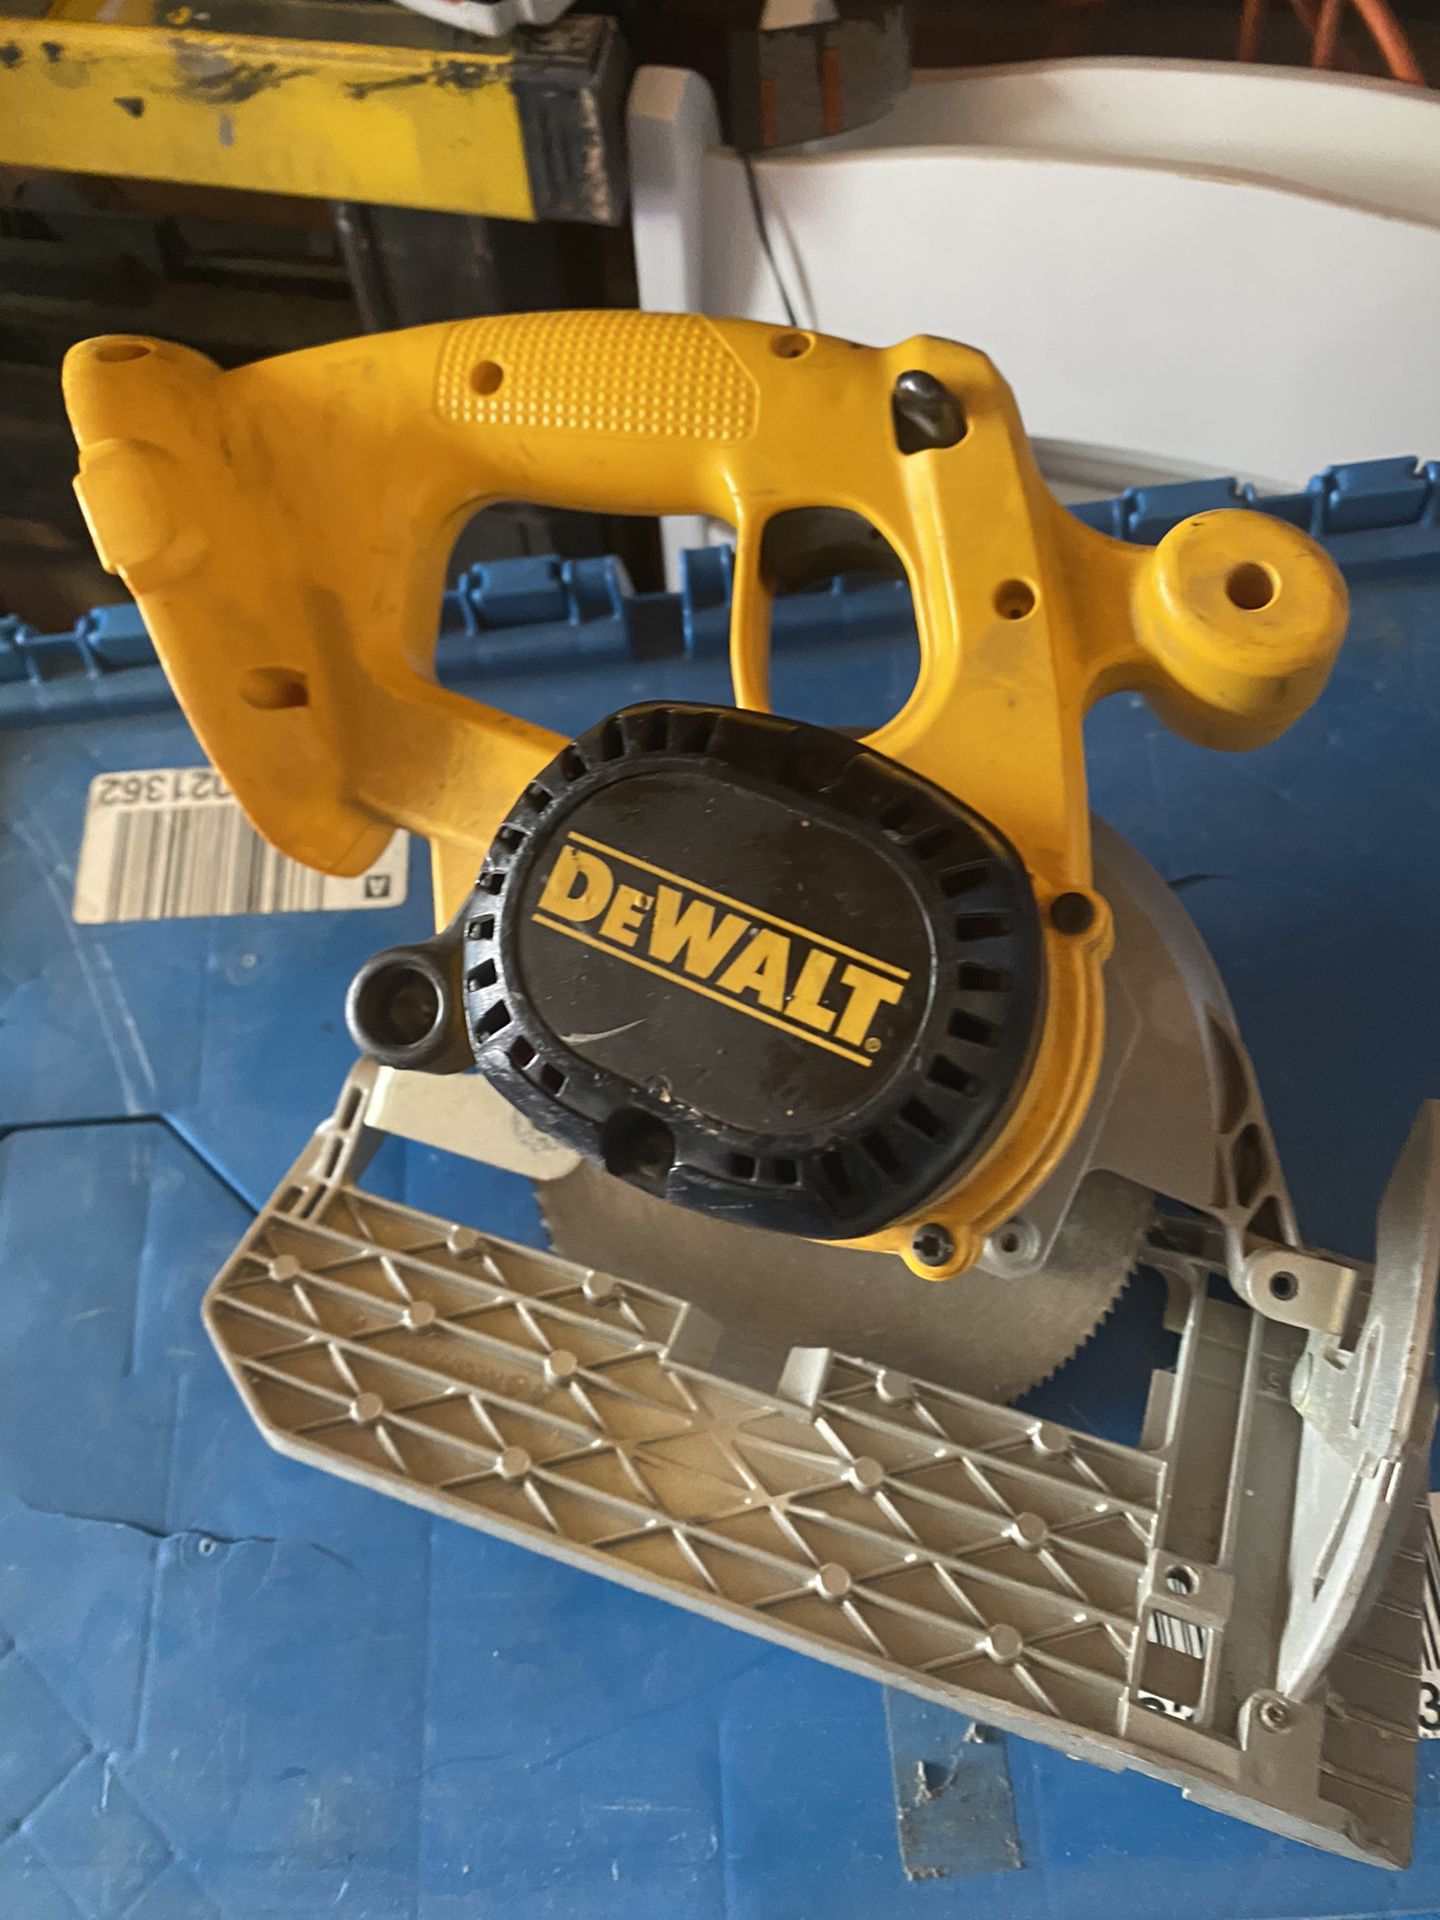 DEWALT DC390 XRP 6-1/2" 18 Volt Cordless Circular Saw Bare Tool USED for Sale in Highland Park, CA -